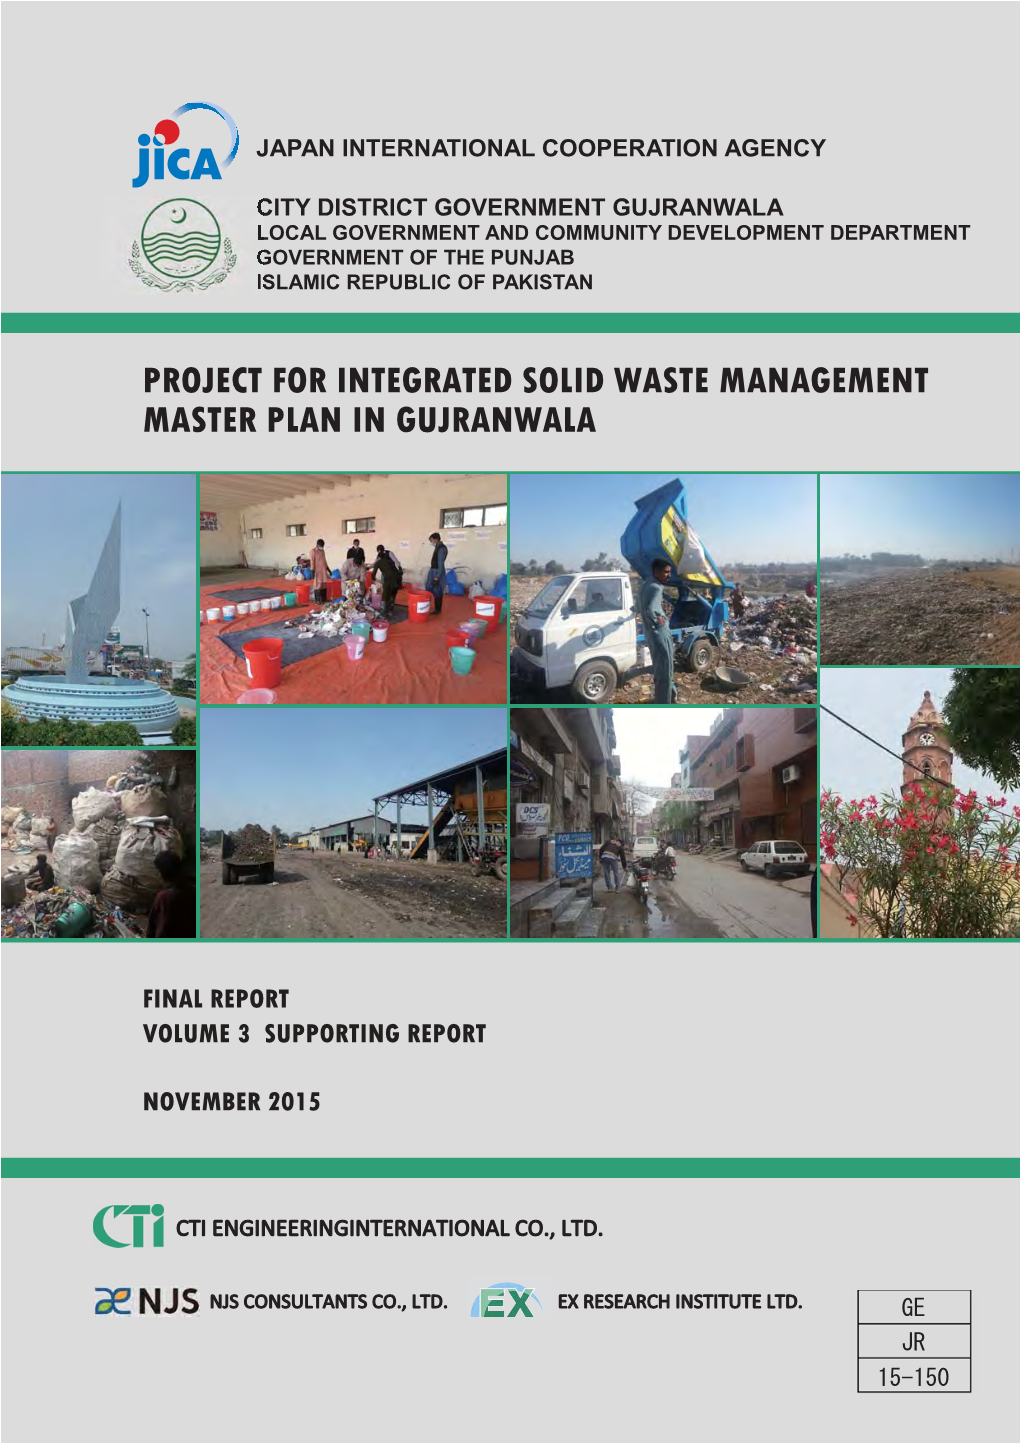 Project for Integrated Solid Waste Management Master Plan in Gujranwala